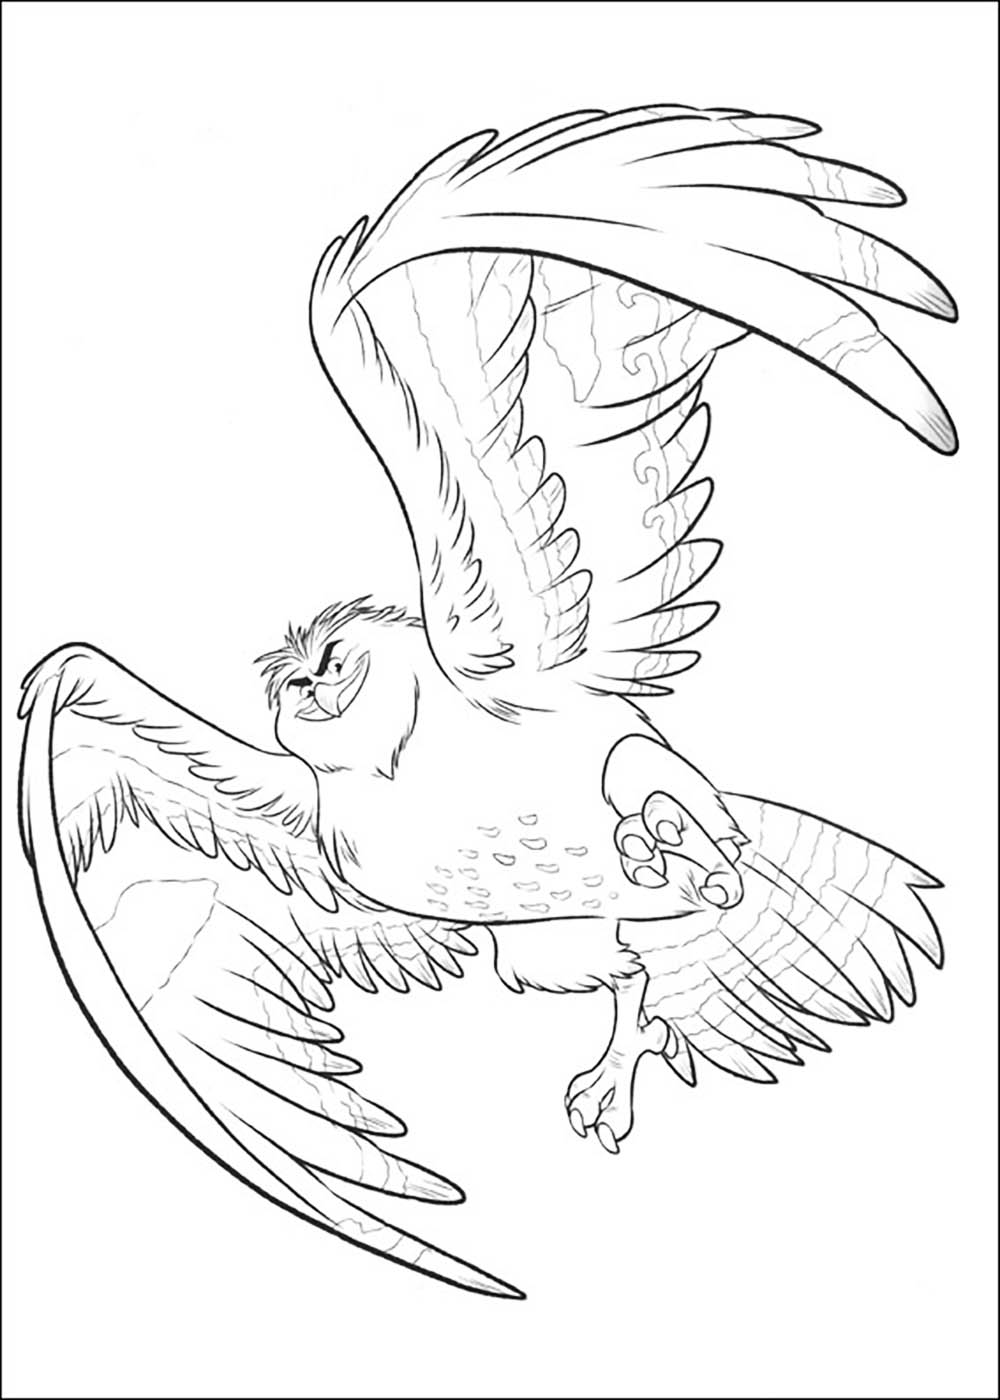 Moana coloring page to print and color for free : Eagle